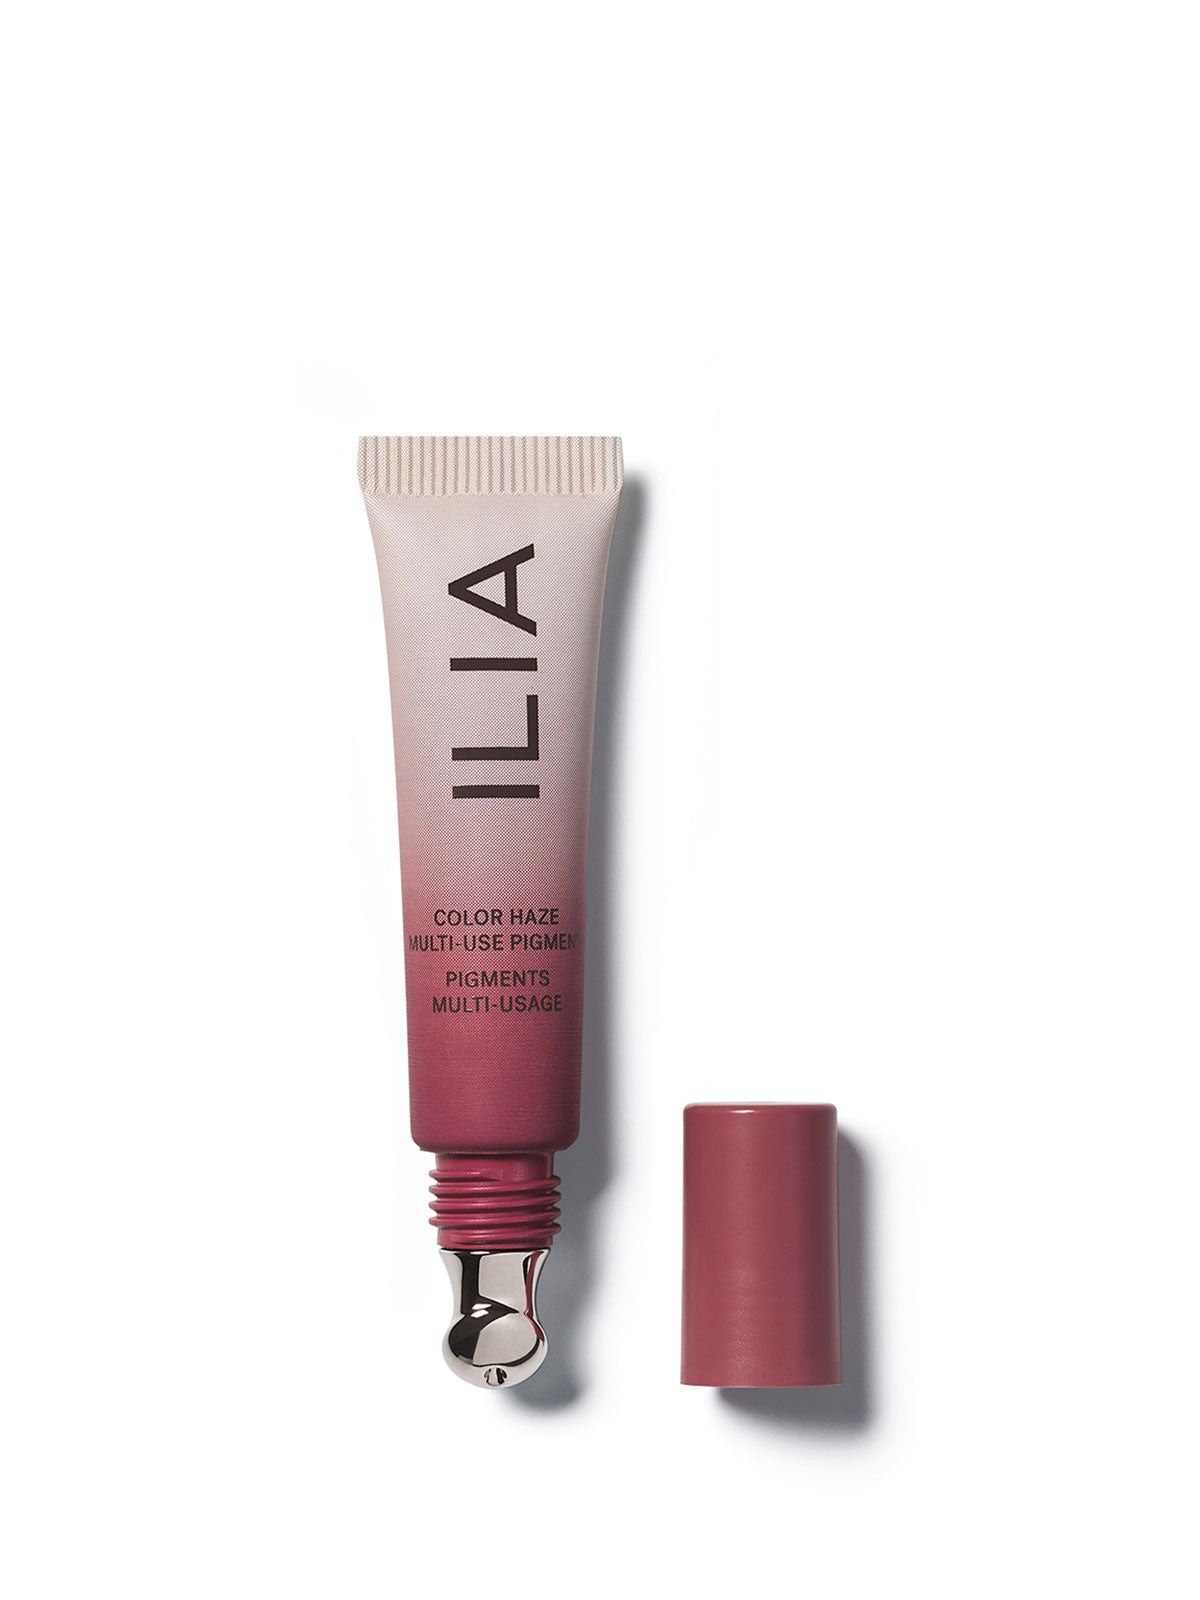 Gifts For Her, Gift Guide For Her | ILIA Beauty